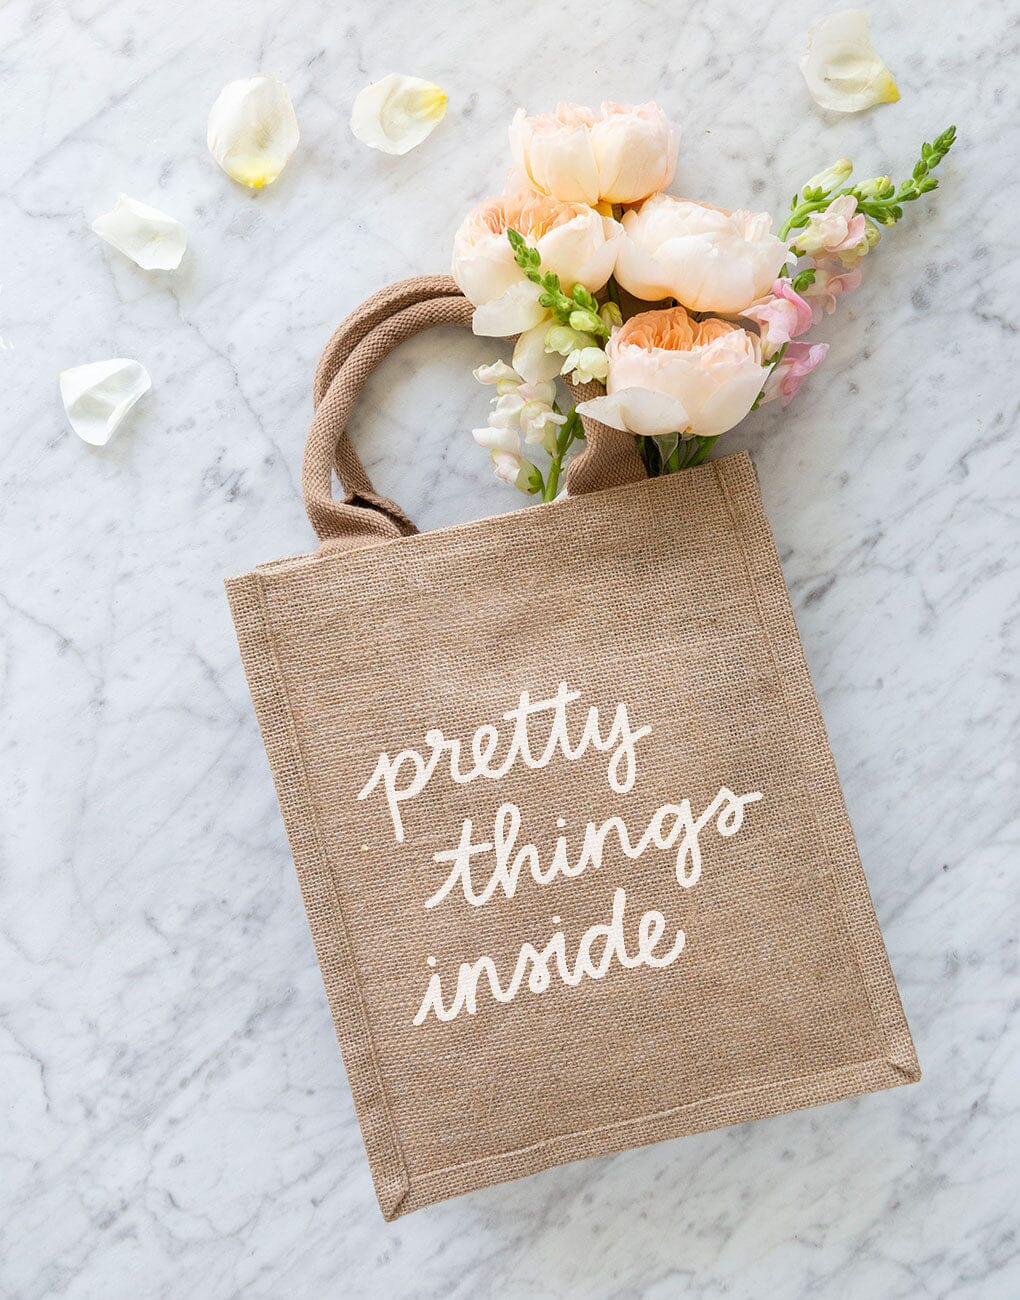 Medium Pretty Things Inside Reusable Gift Tote In White Font | The Little Market